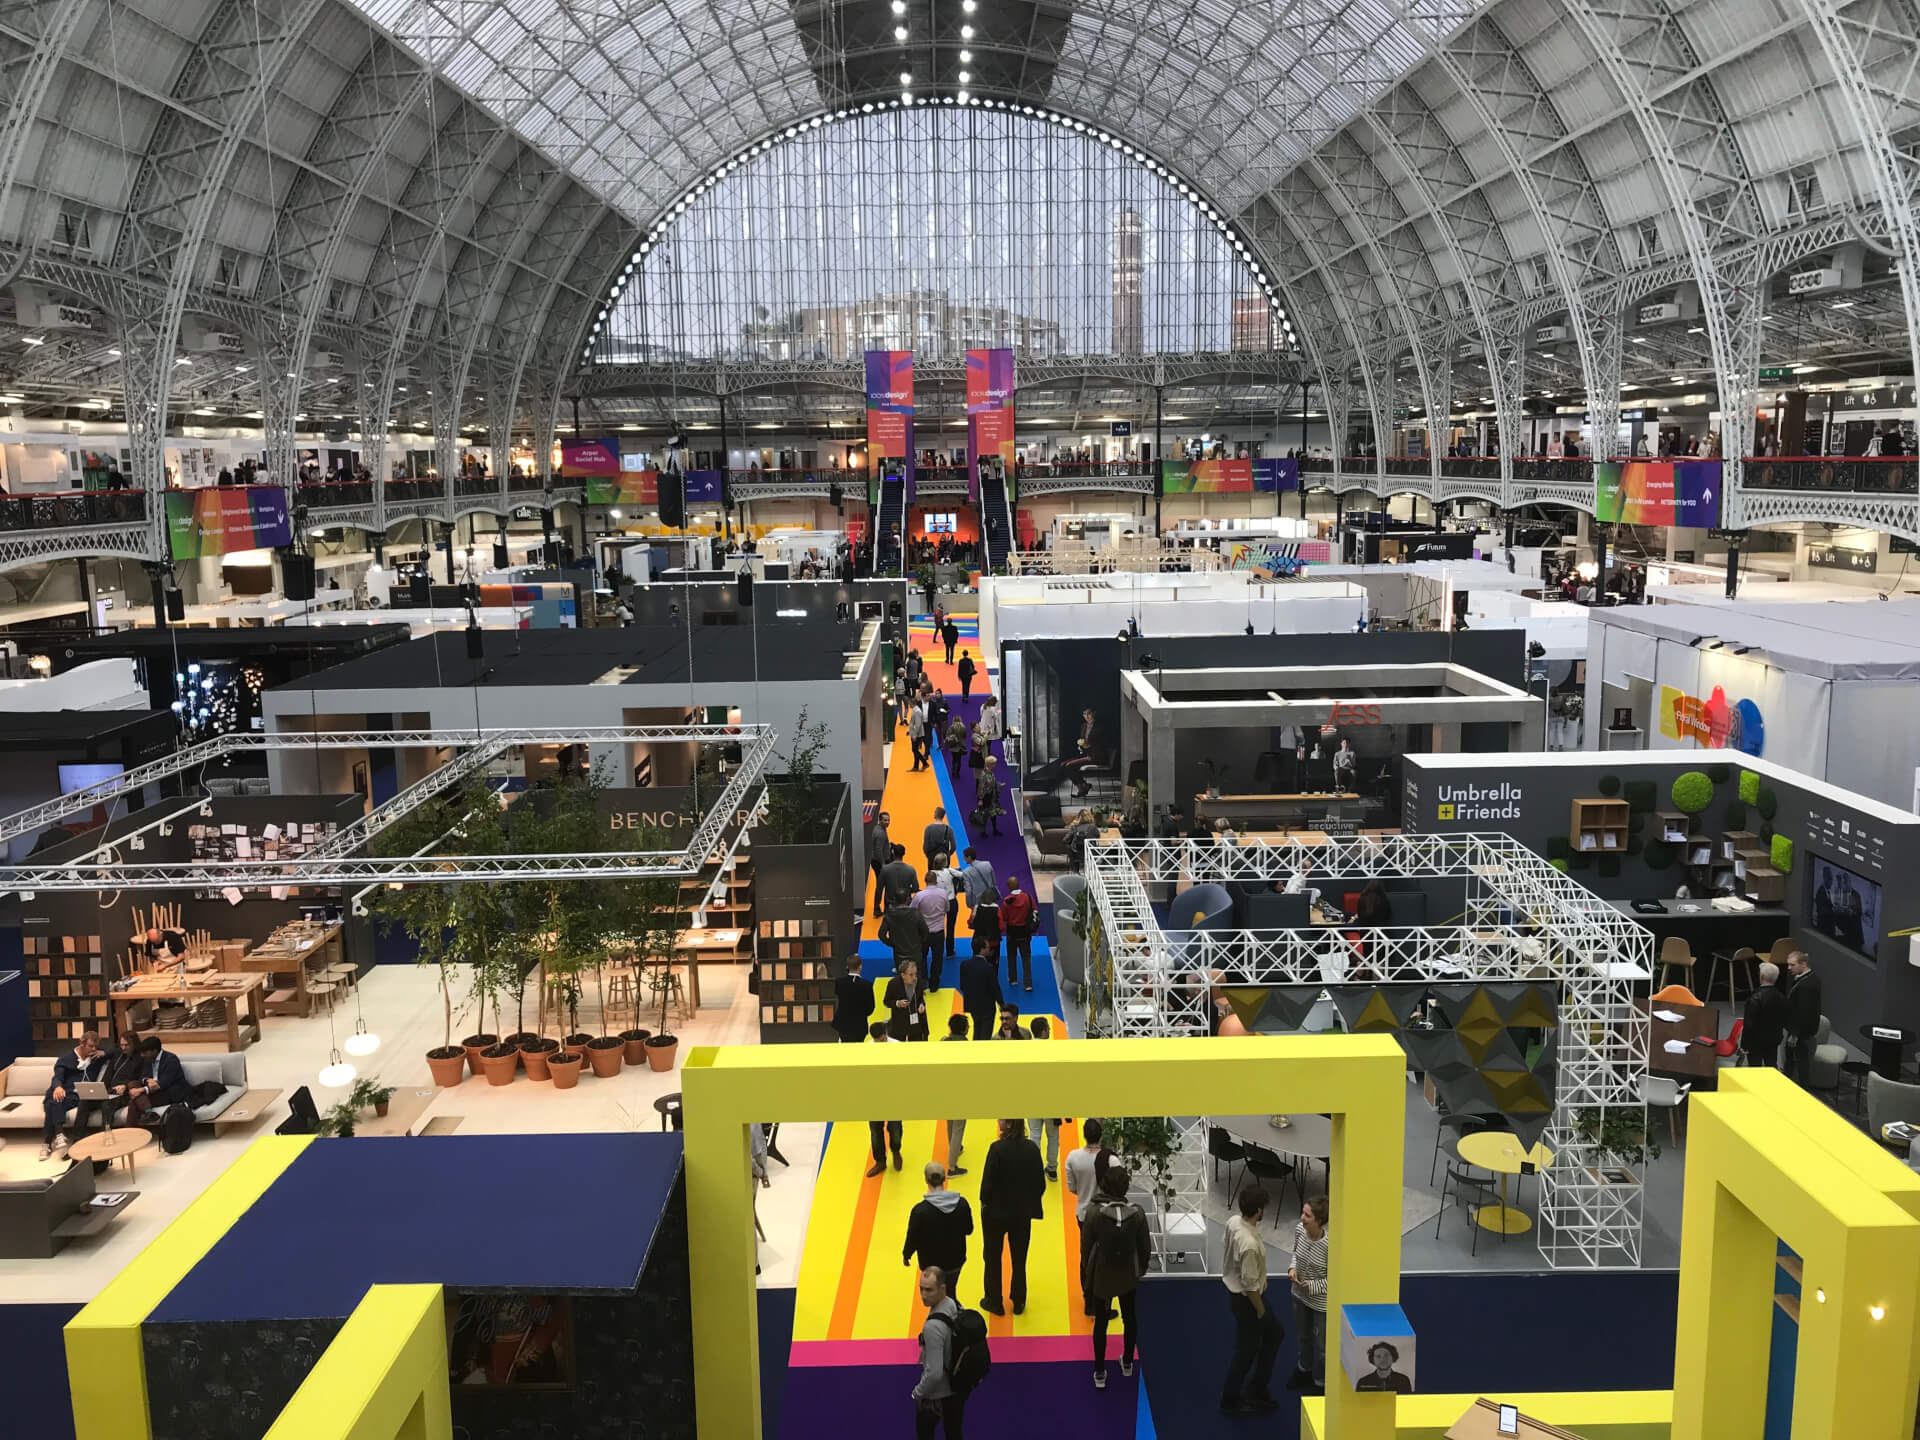 Architecture events and interior design trade shows for 2019